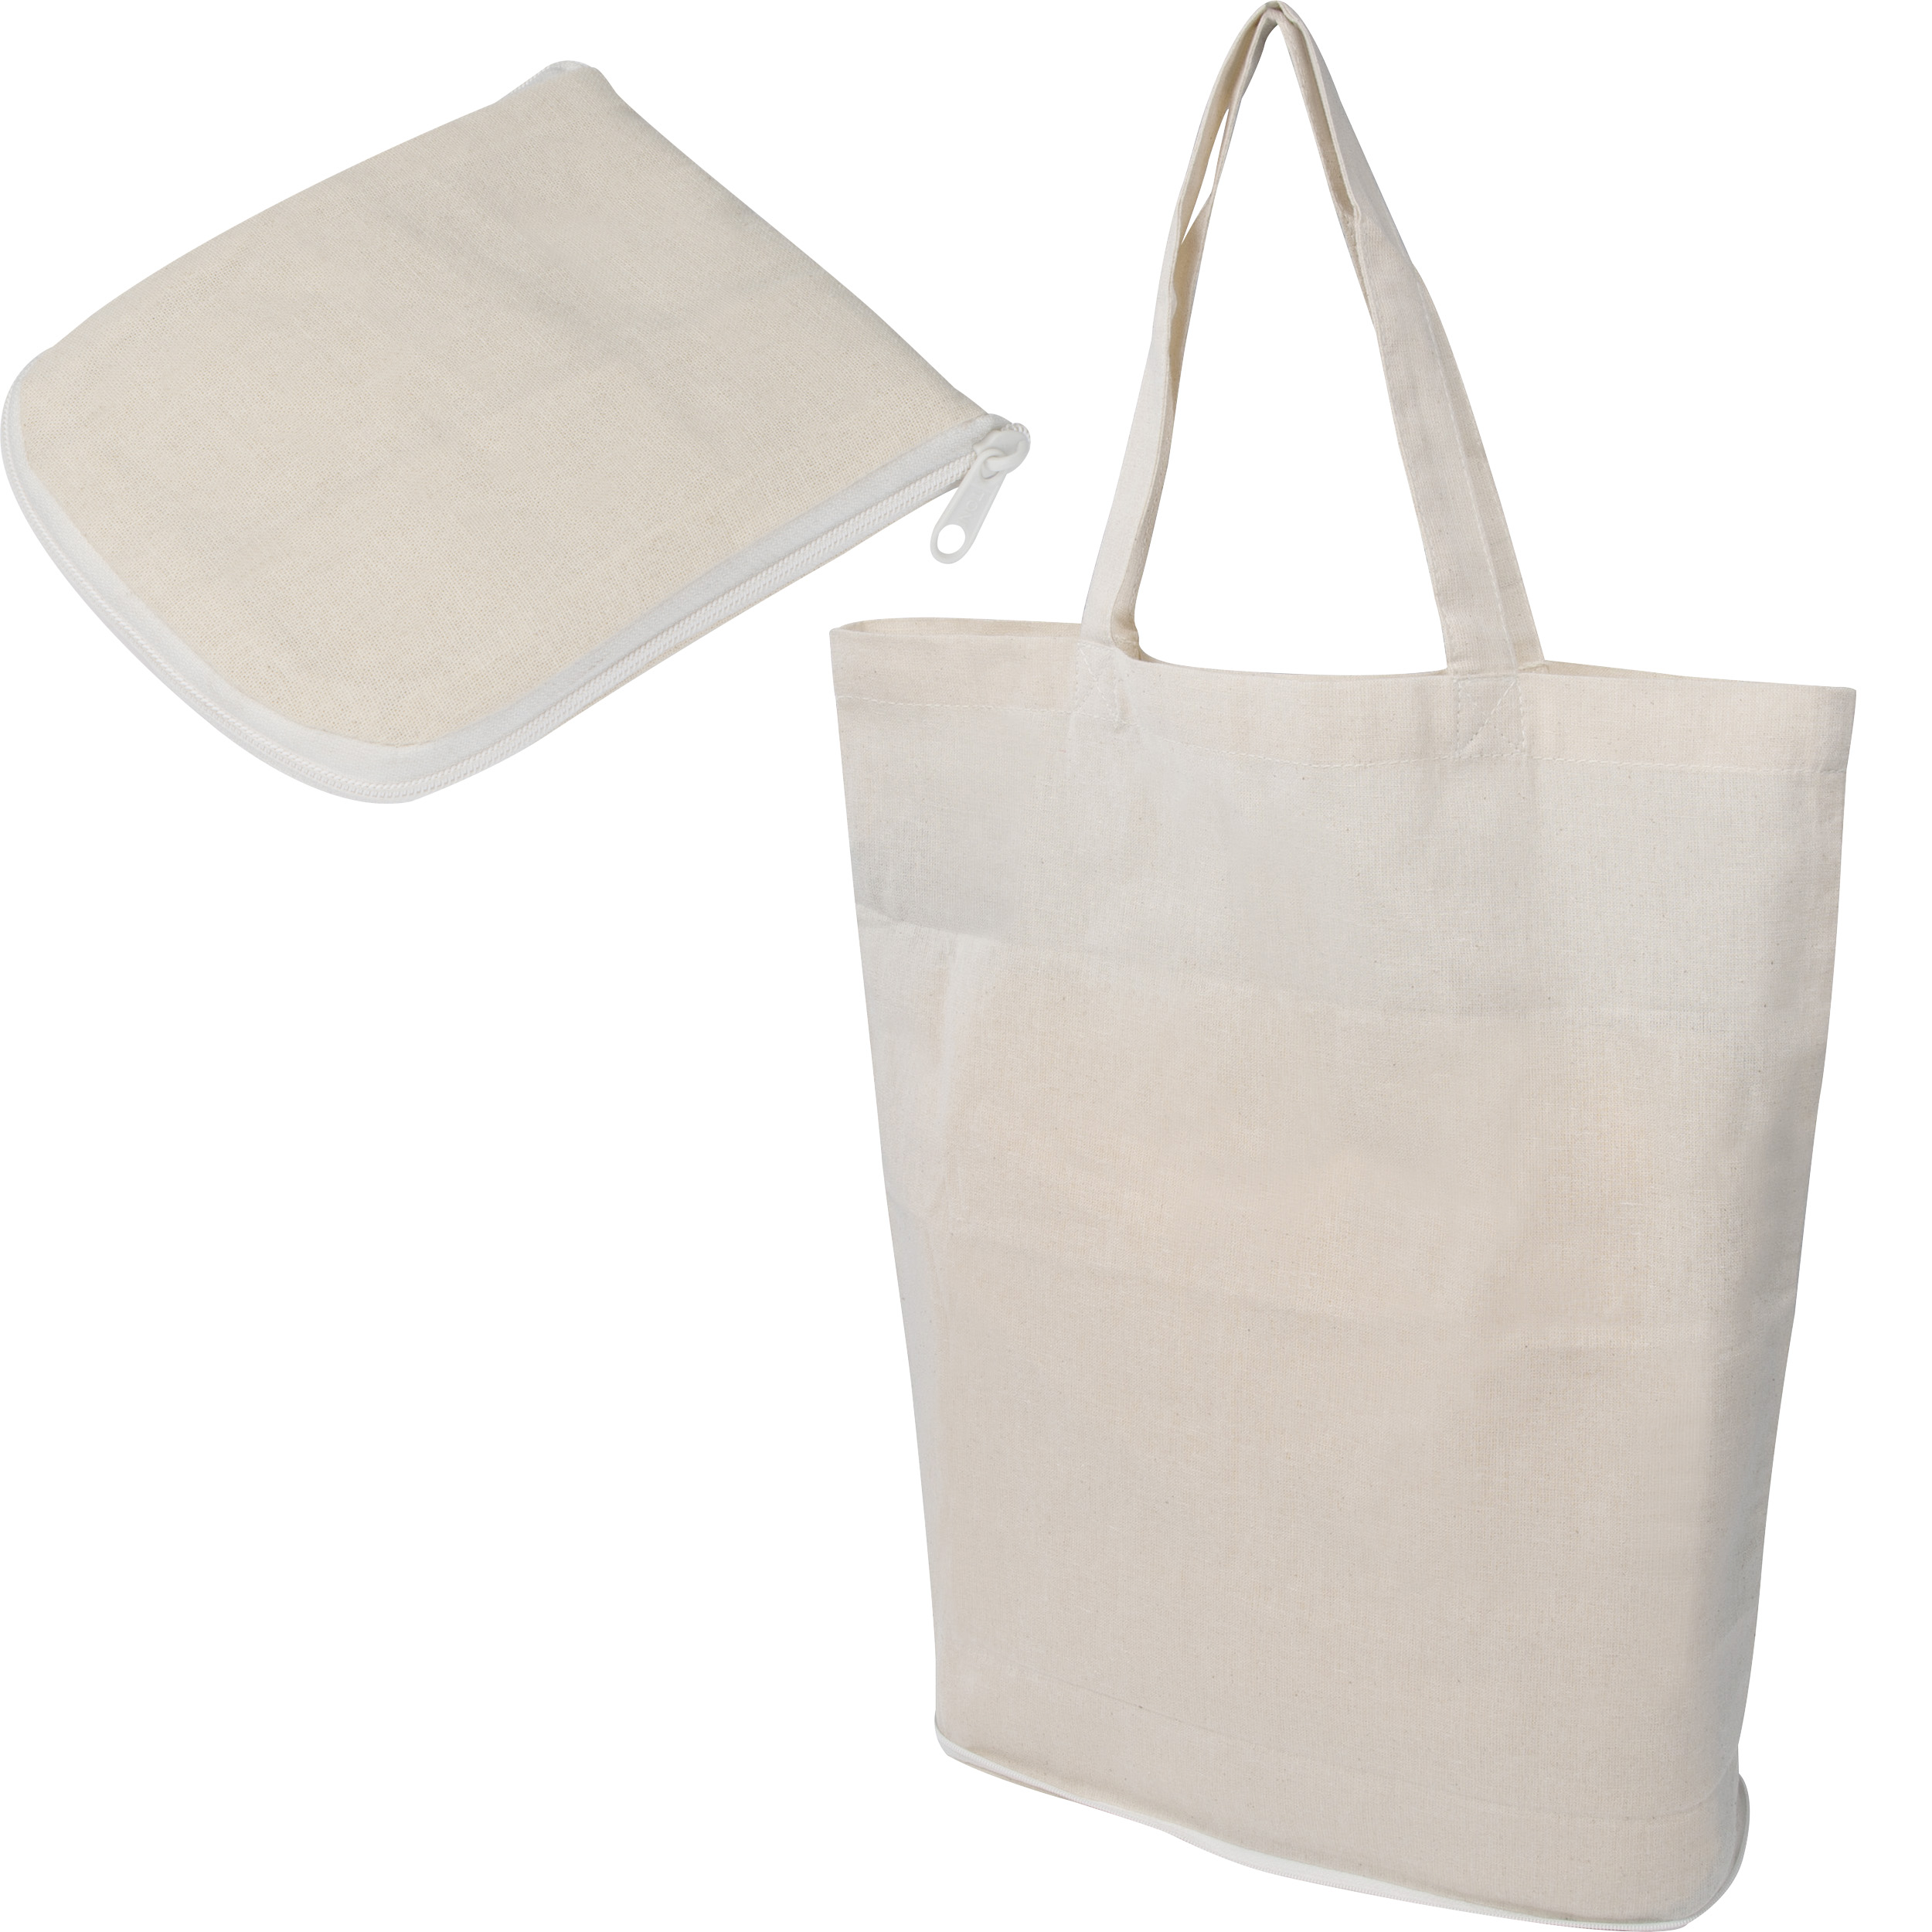 Foldable shopping bag in cotton